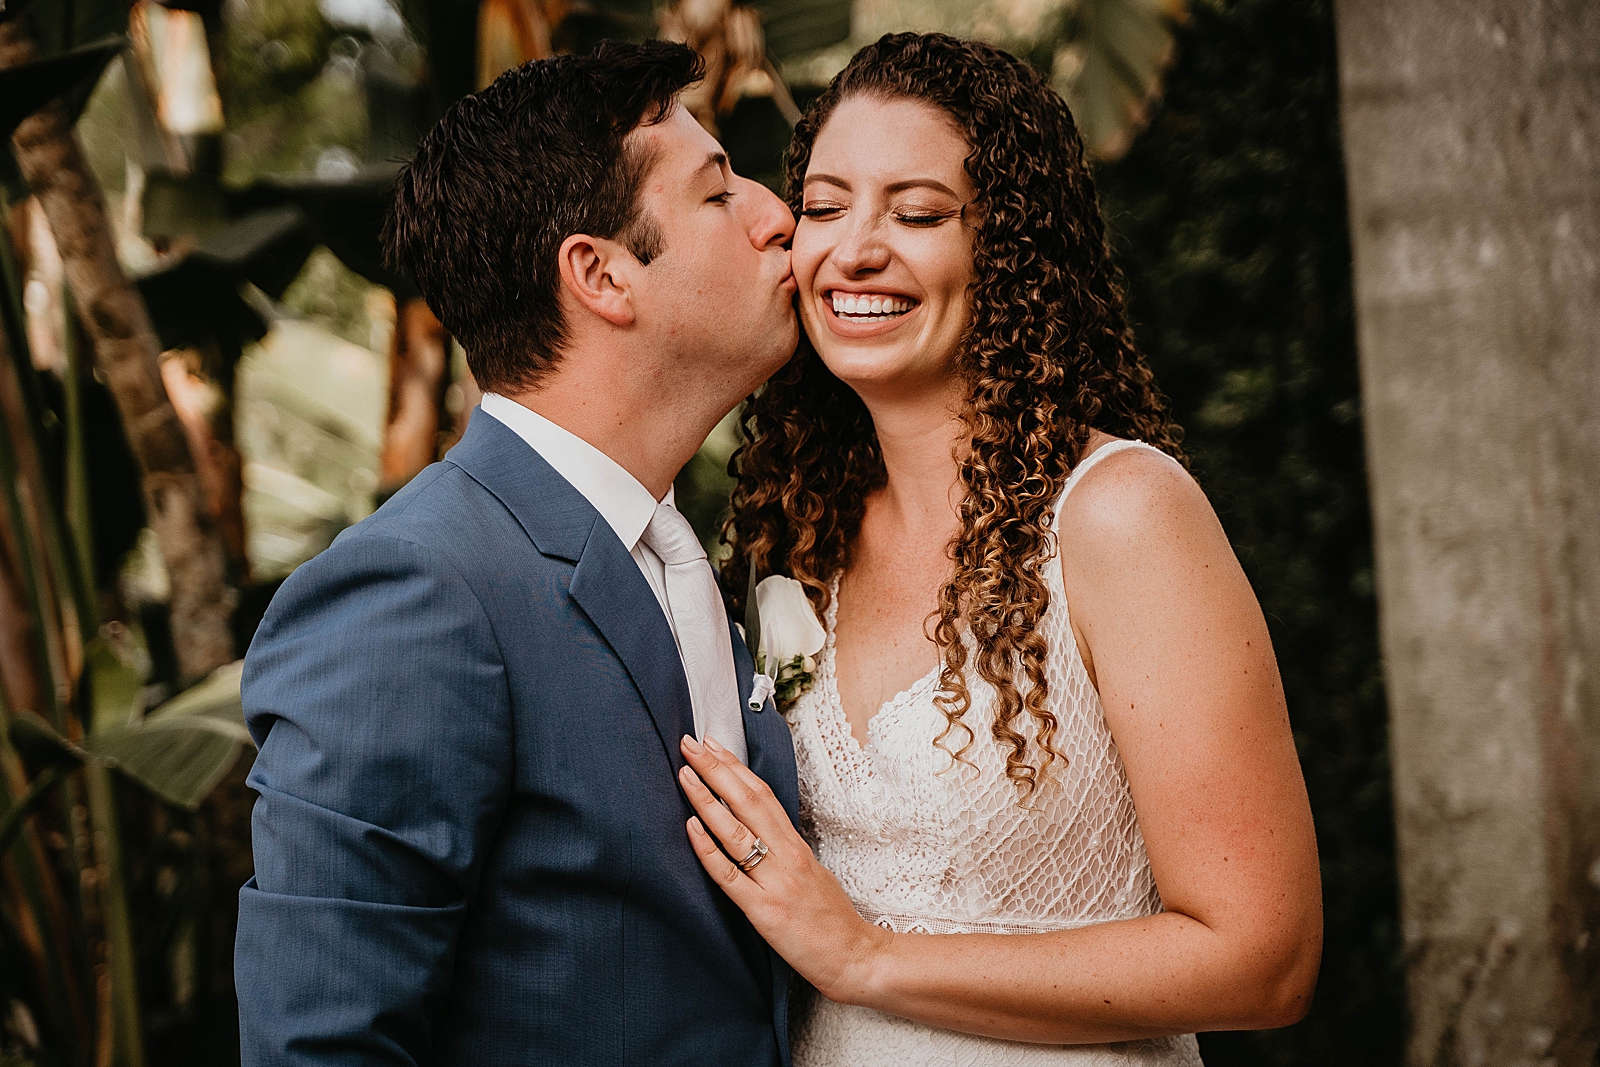 Groom kissing Bride on her cheek Intimate South Florida Wedding Photography captured by South Florida Wedding Photographer Krystal Capone Photography 